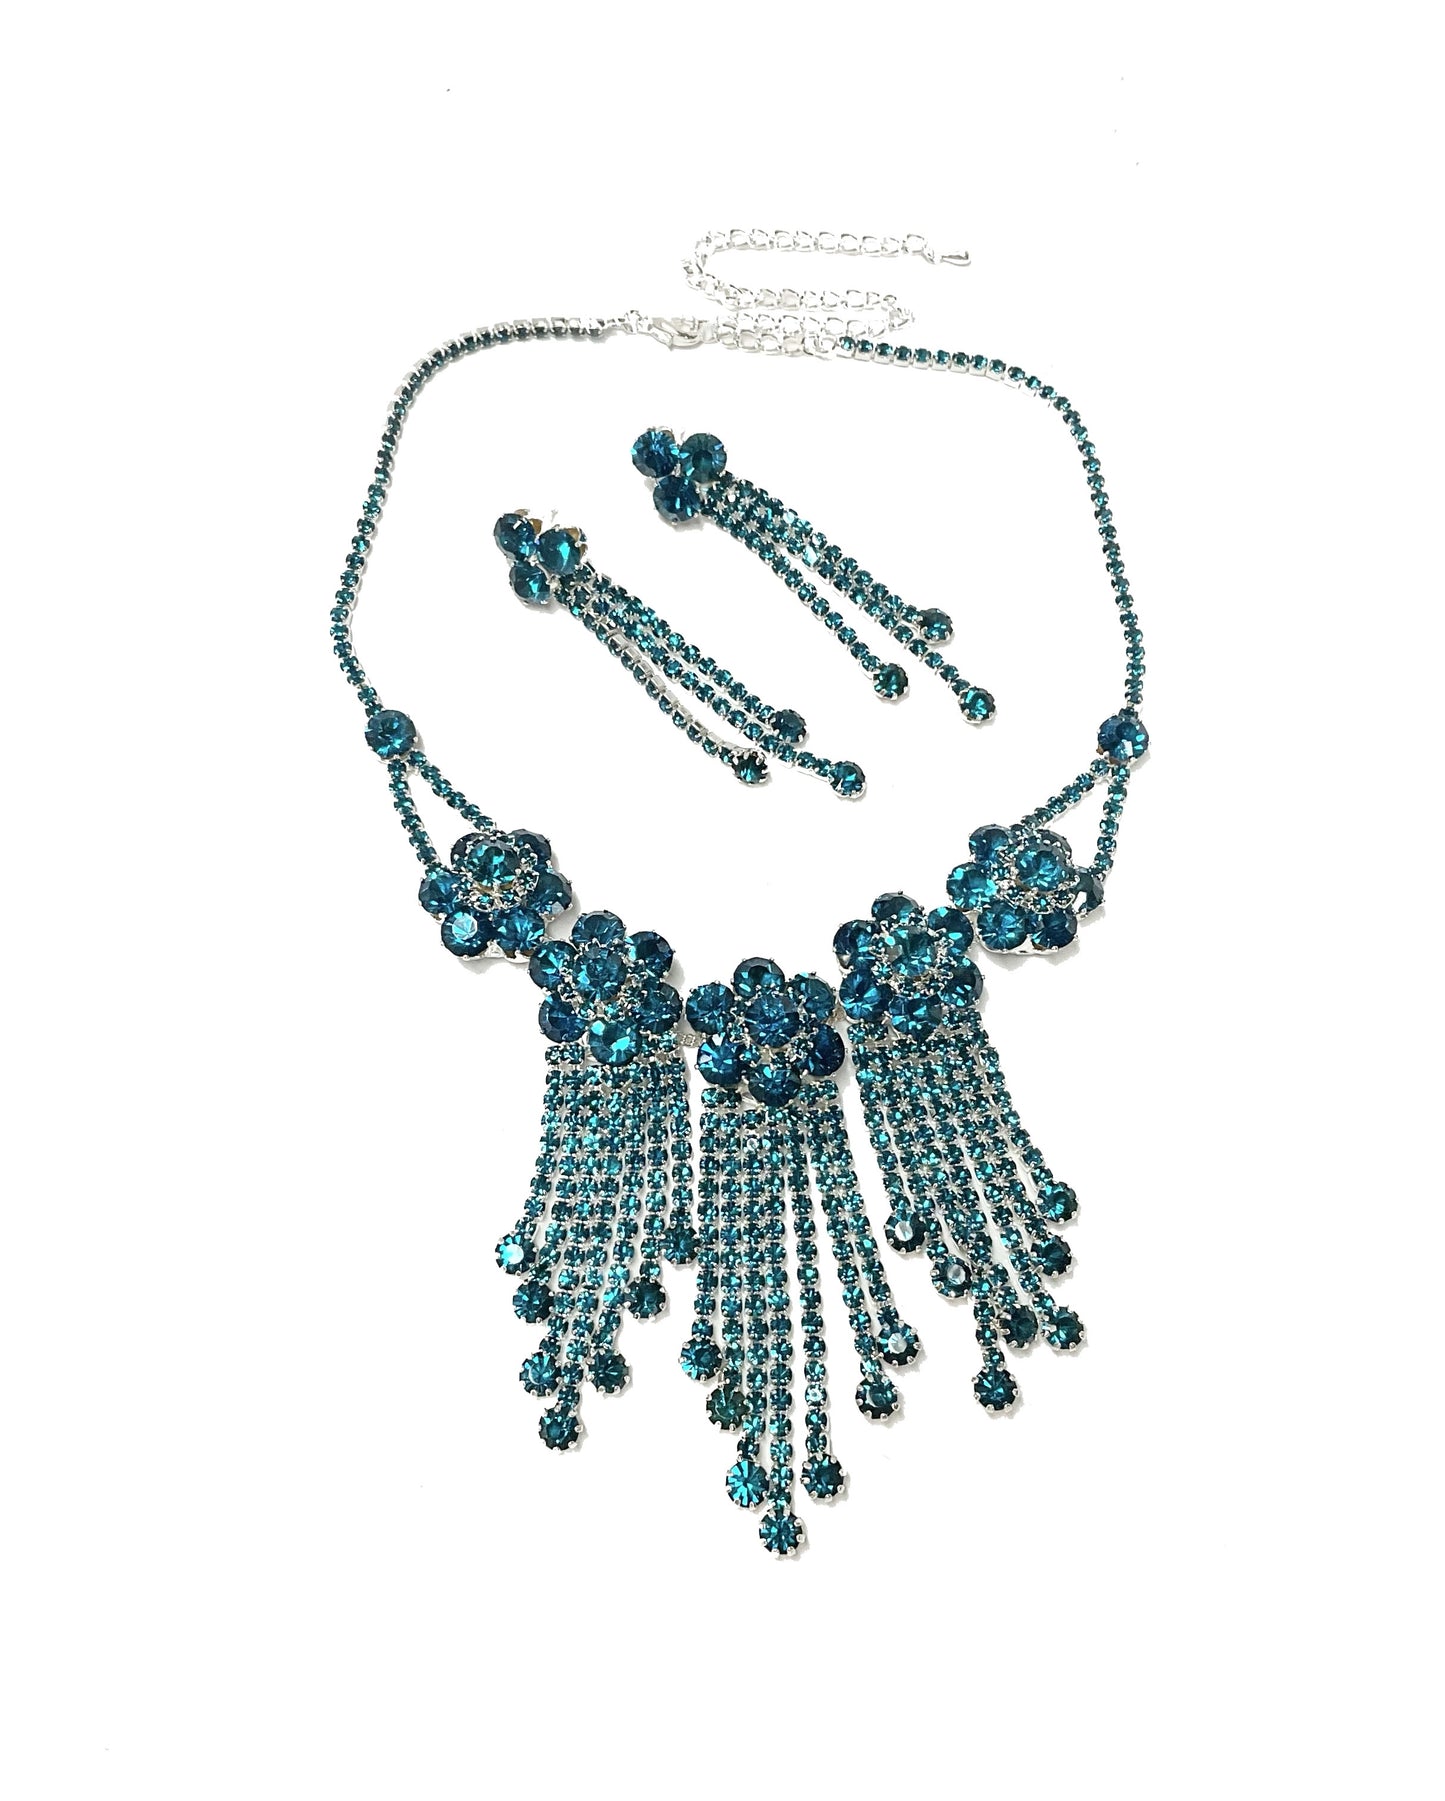 Flower Dangling Style Necklace and Earrings Set#66-14060Teal